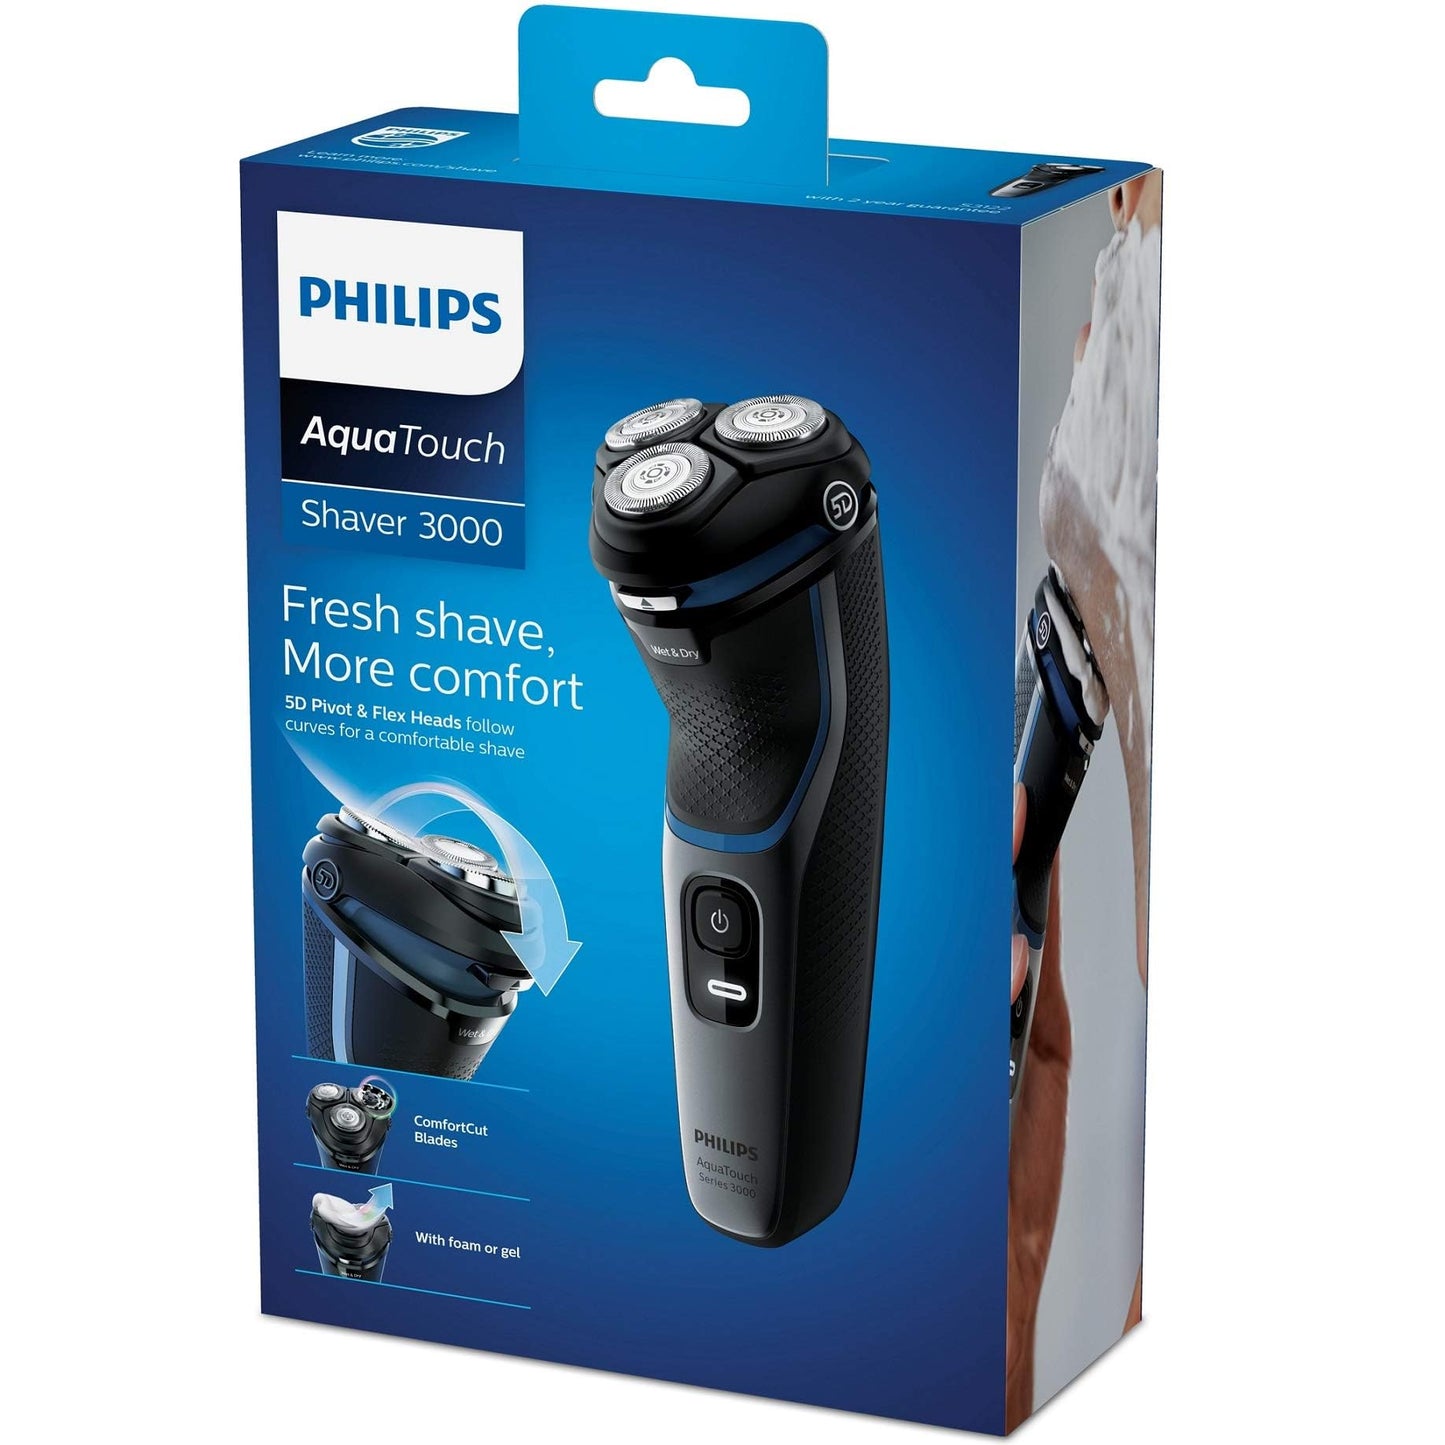 Philips Wet Or Dry Electric Shaver, Black, S312250. 2 Years Warranty